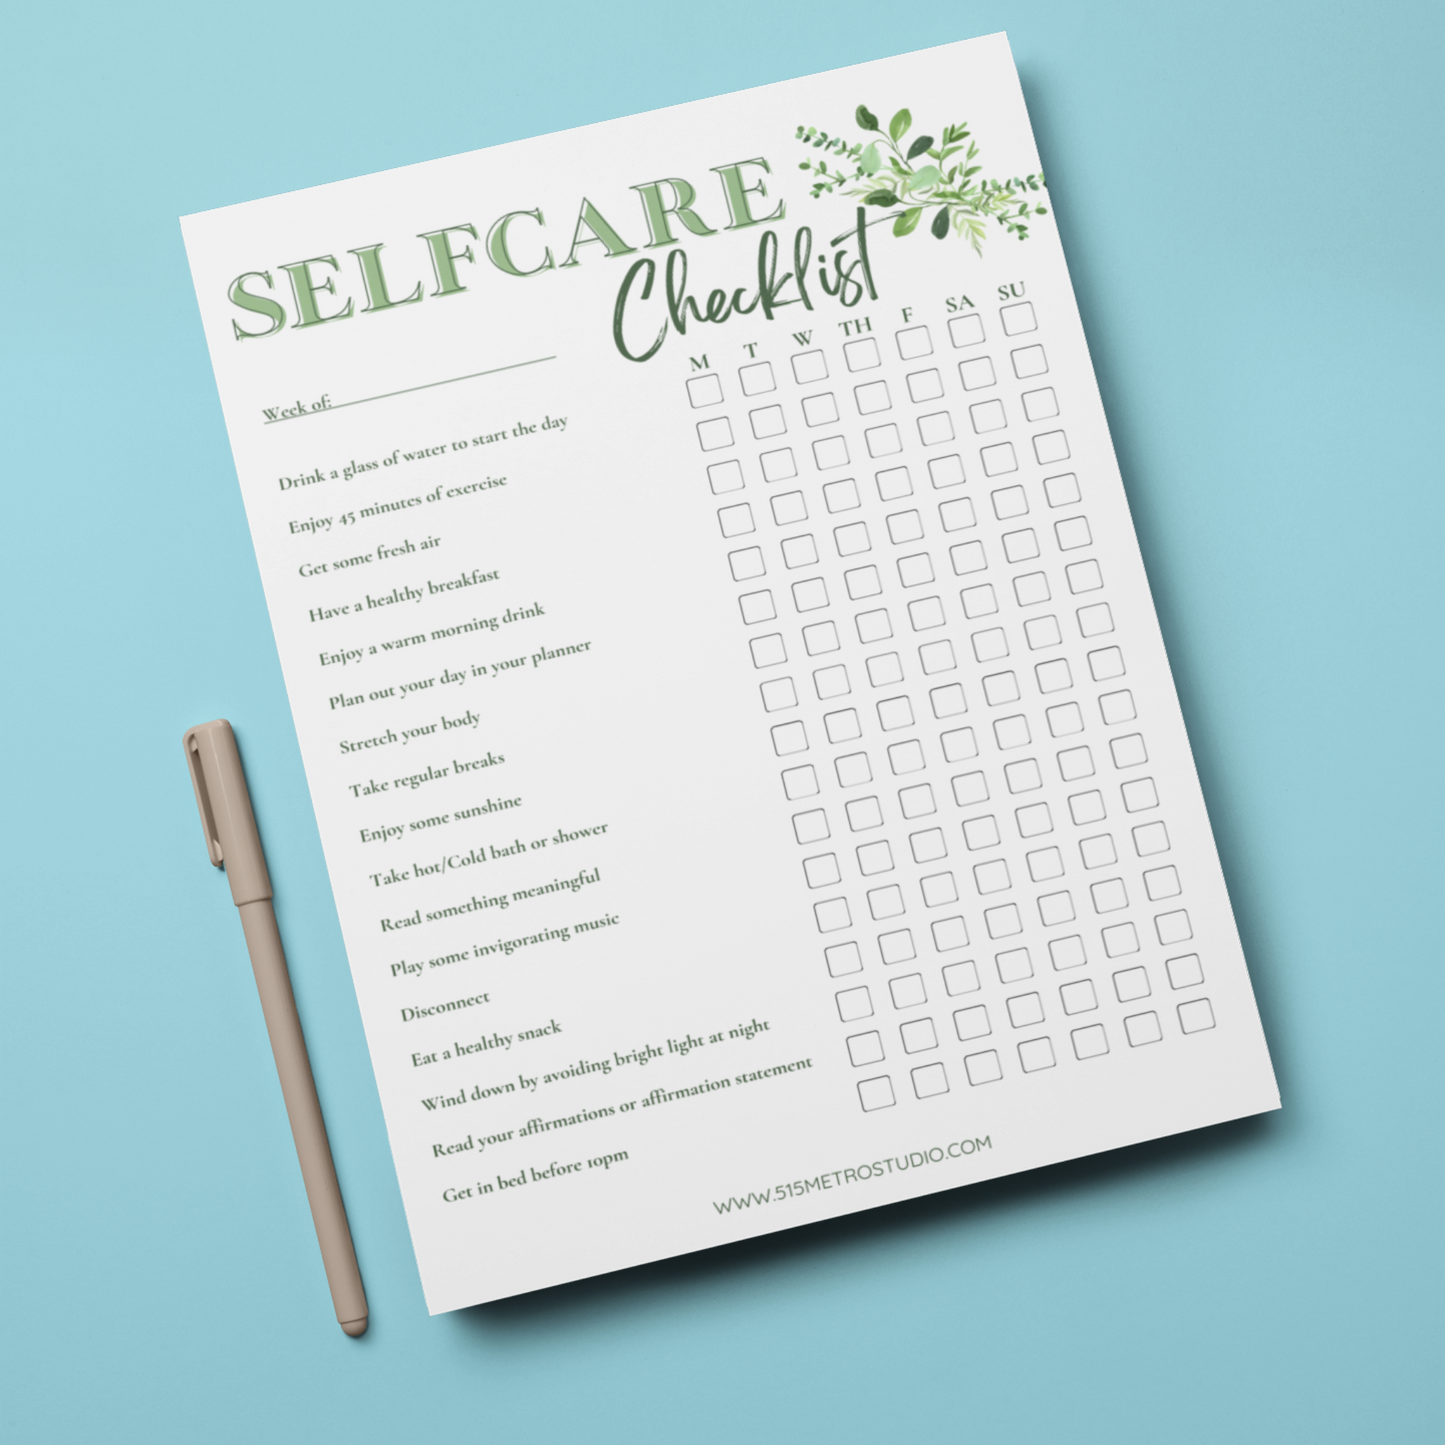 Self Care Checklist -Greenery | Instant Printable Download